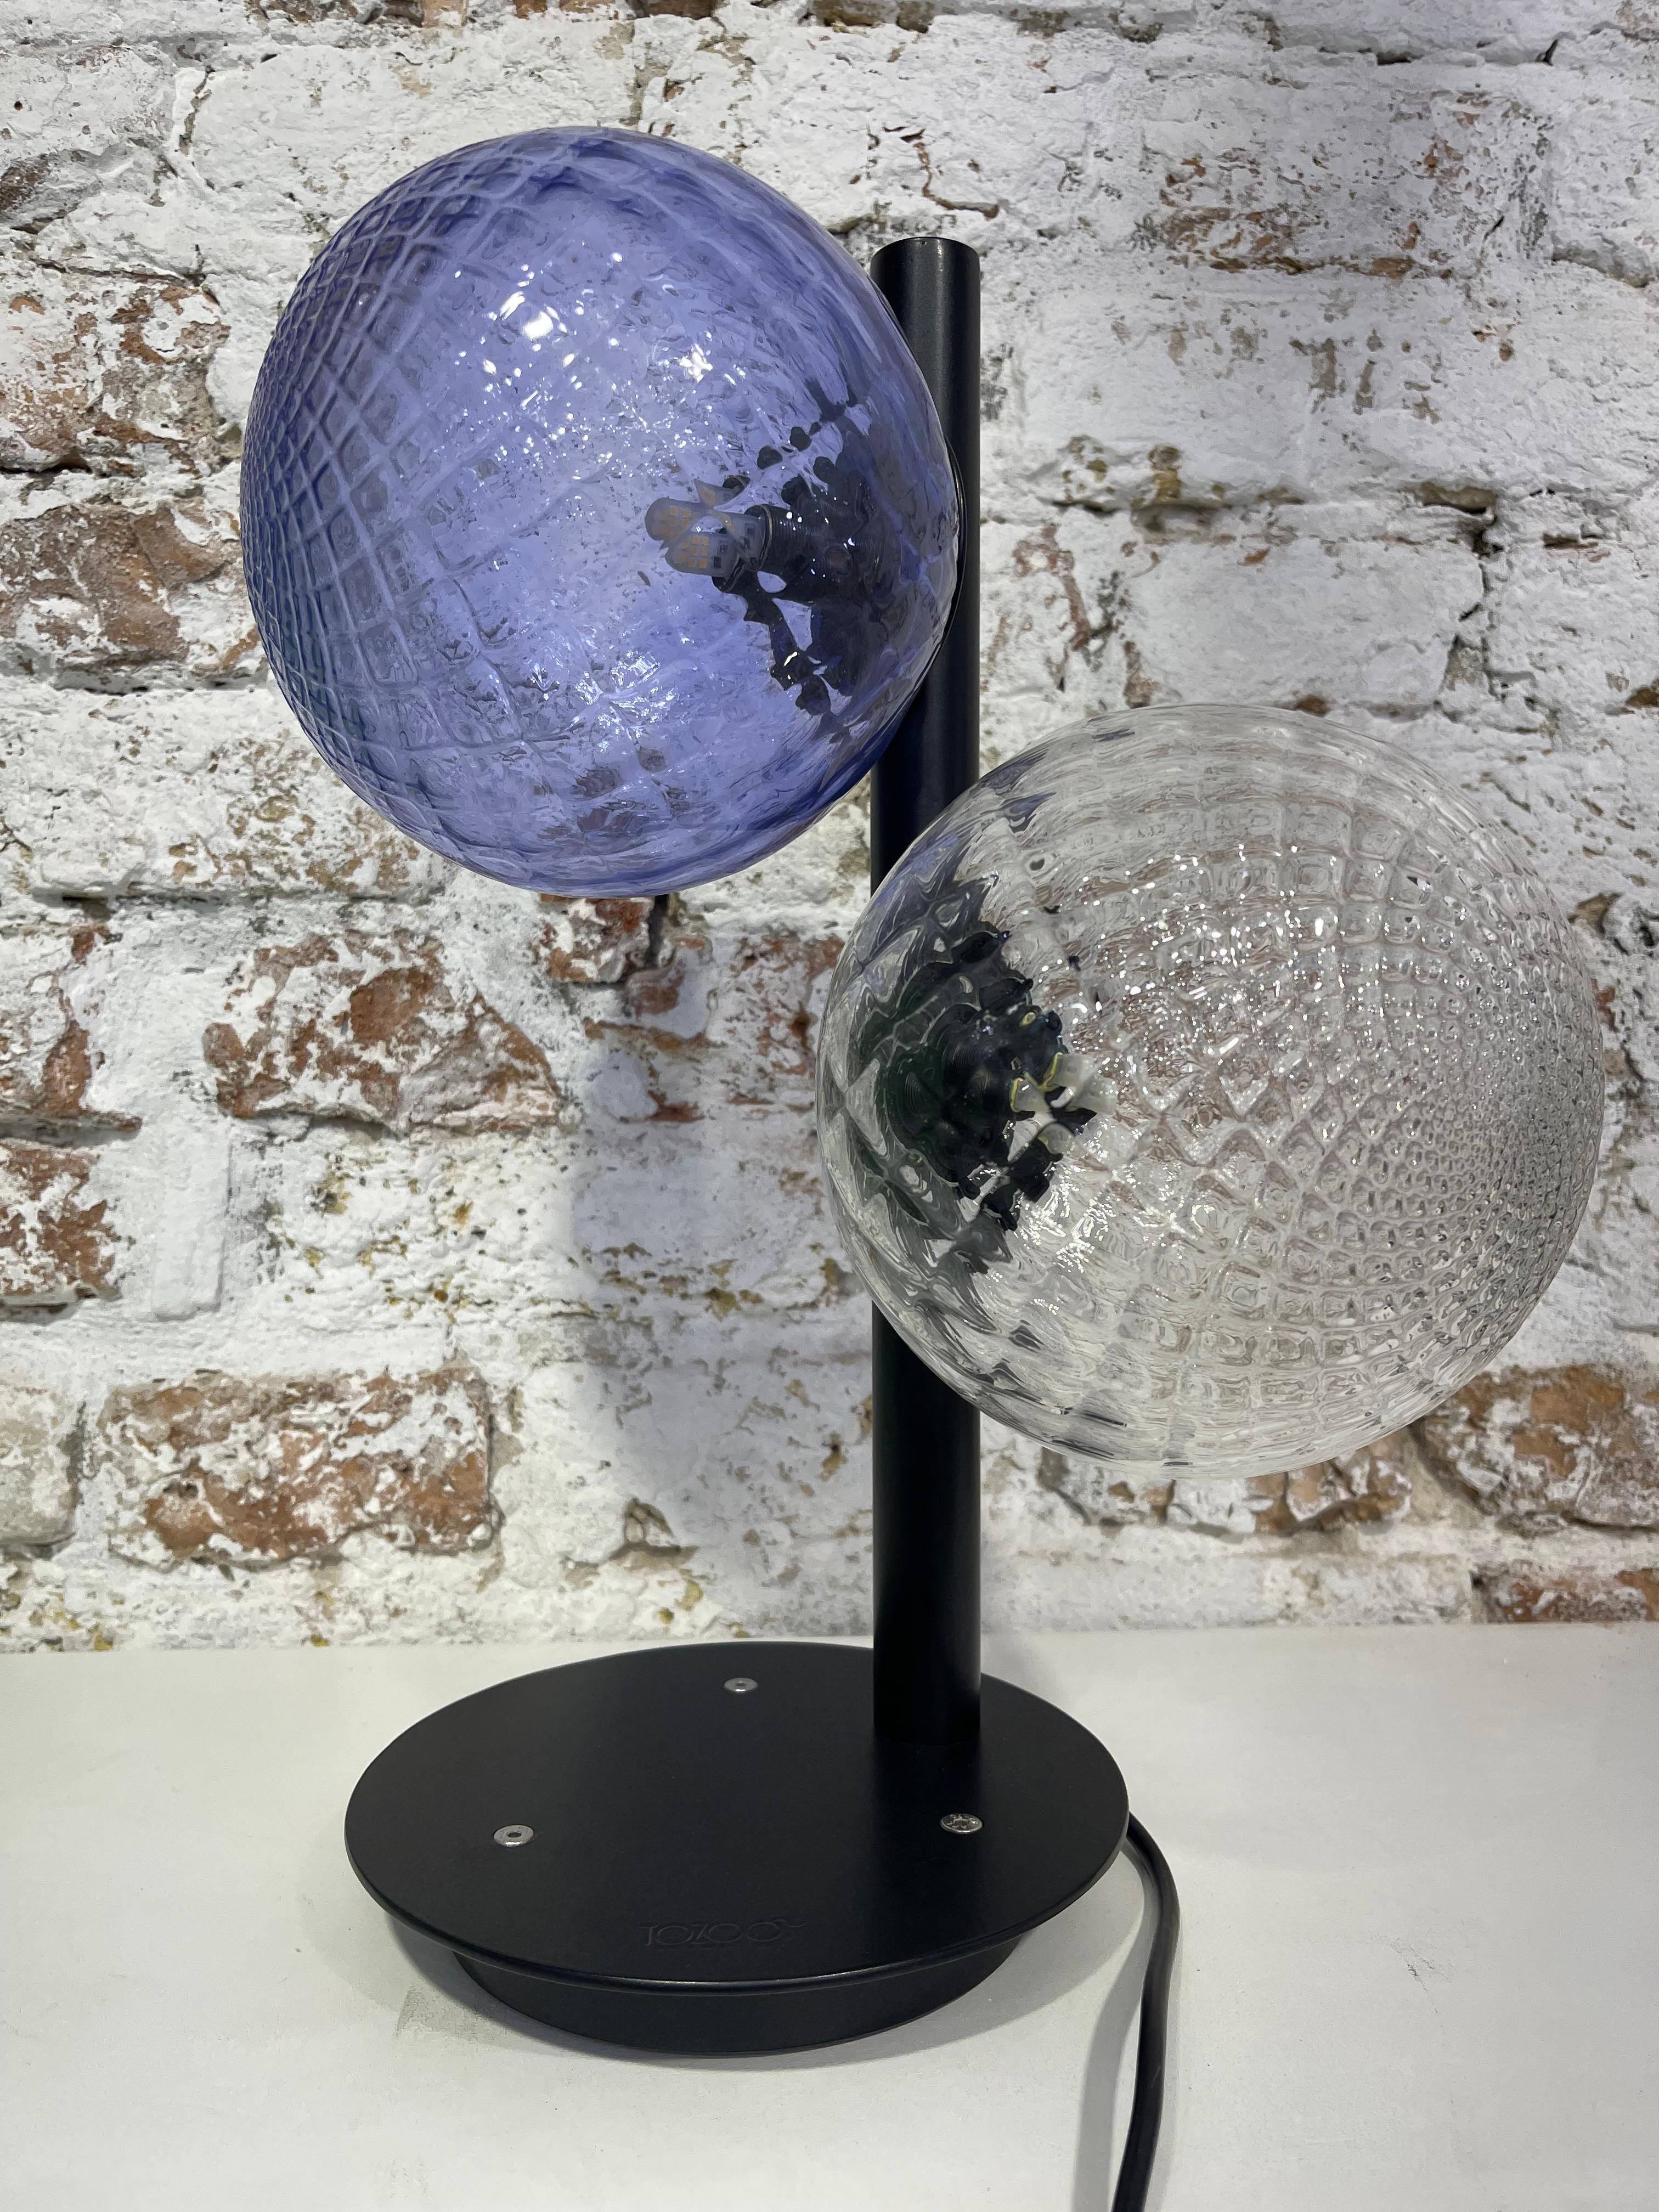 Contemporary, playful, and poetic are some of the adjectives that can be used to describe this table lamp, handmade in our family-owned furnace. Our lamps are composed of two handcrafted elements, a metal structure with an integrated dimming system